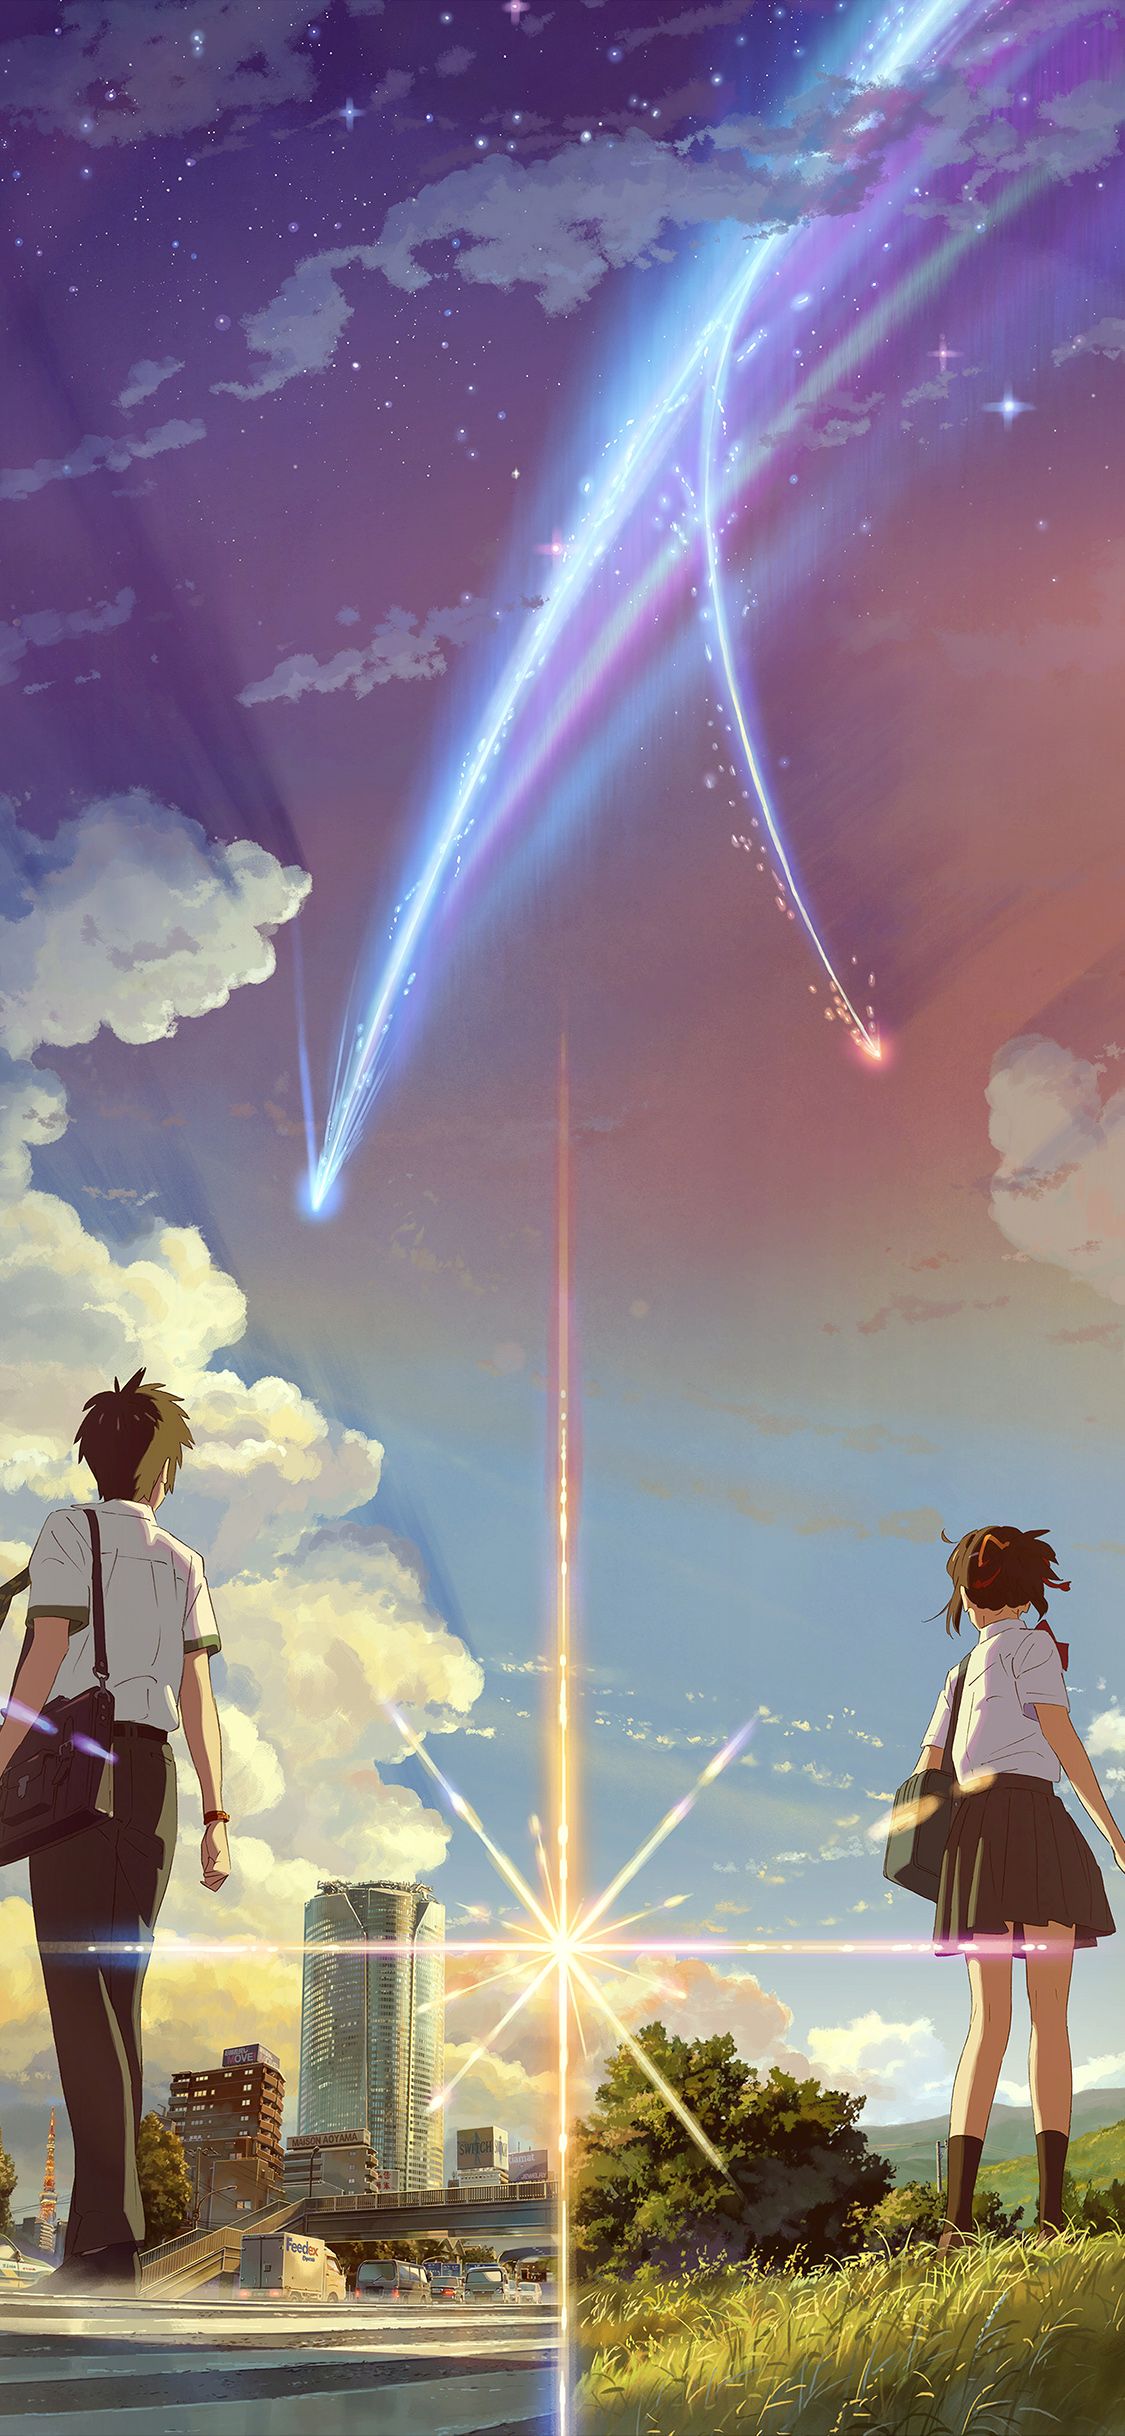 iPhone X wallpaper. boy and girl anime